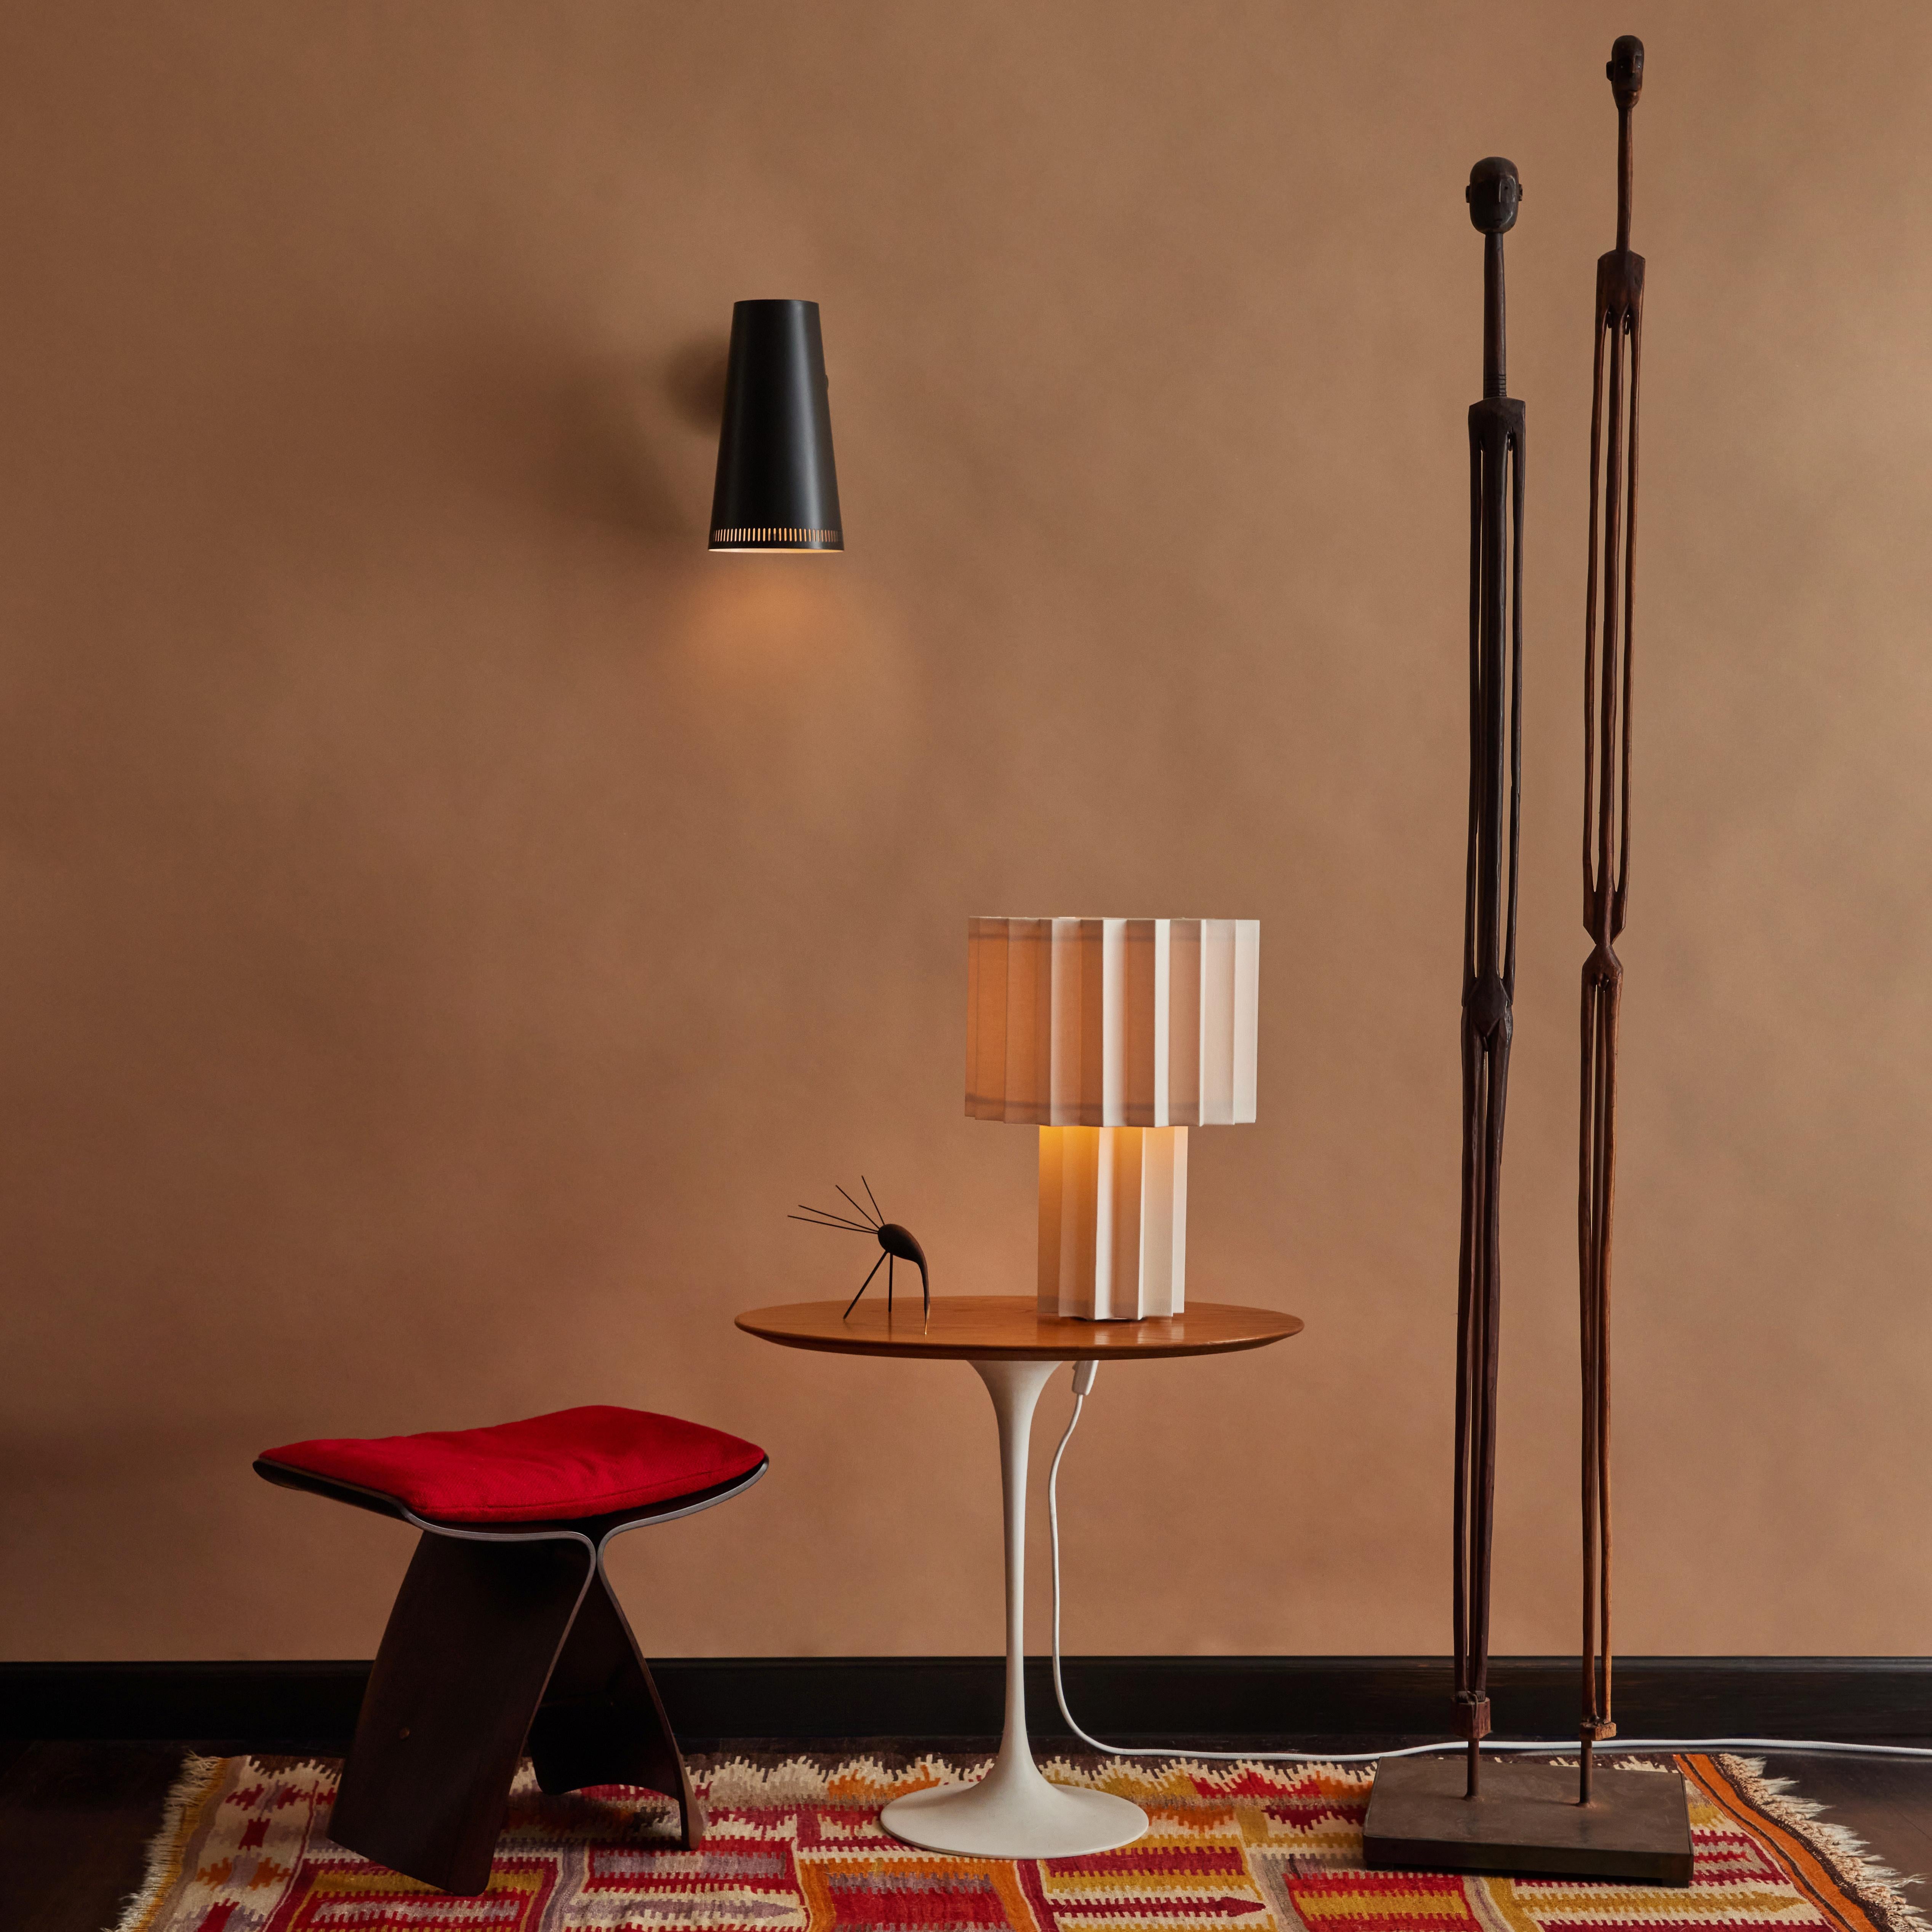 'Plissé White Edition' pleated textile table lamp by Folkform for Örsjö.

This unique table lamp was awarded “Lighting of the Year 2022” by Residence Magazine Sweden, who called it “a sophisticated jewel of light that brings the somewhat neglected